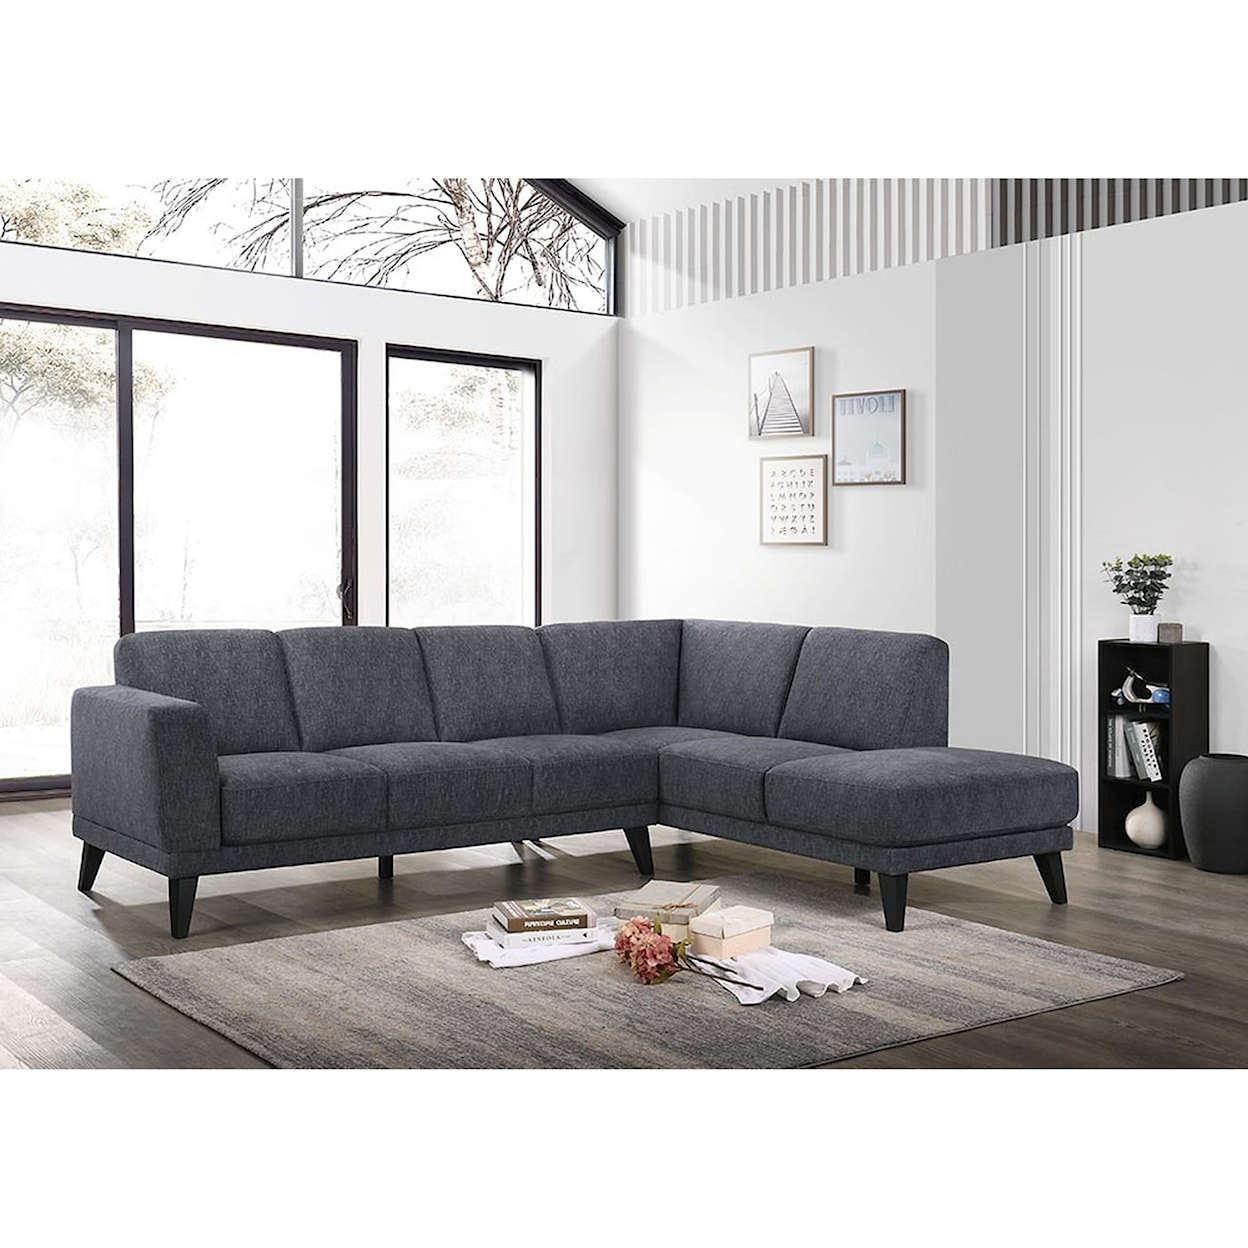 New Classic Altamura 5-Seat Sectional w/ RAF Chaise